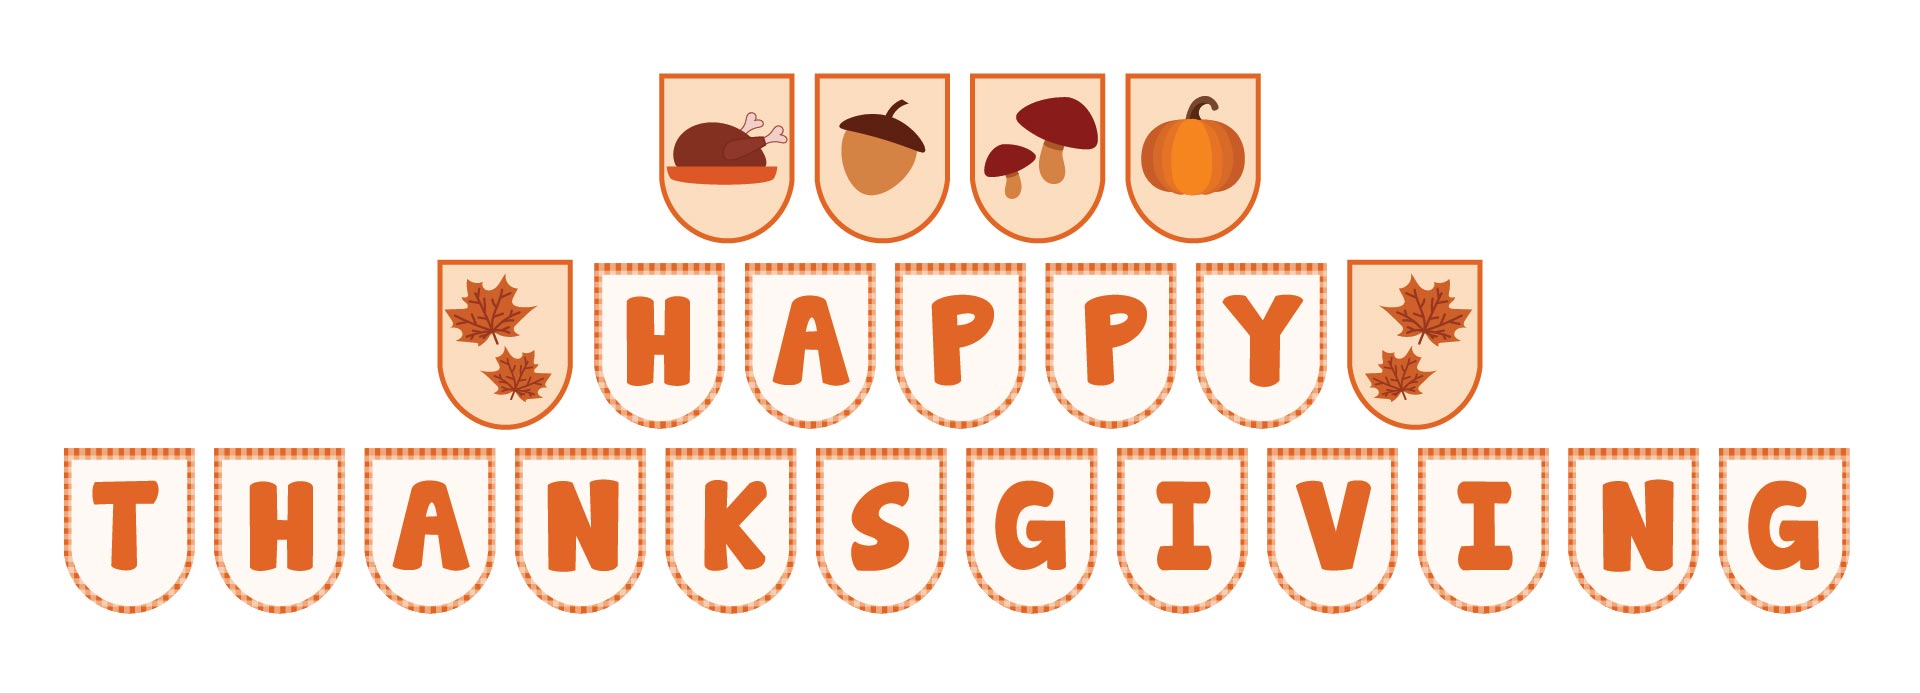 10-best-images-of-thanksgiving-printable-banners-templates-free-free